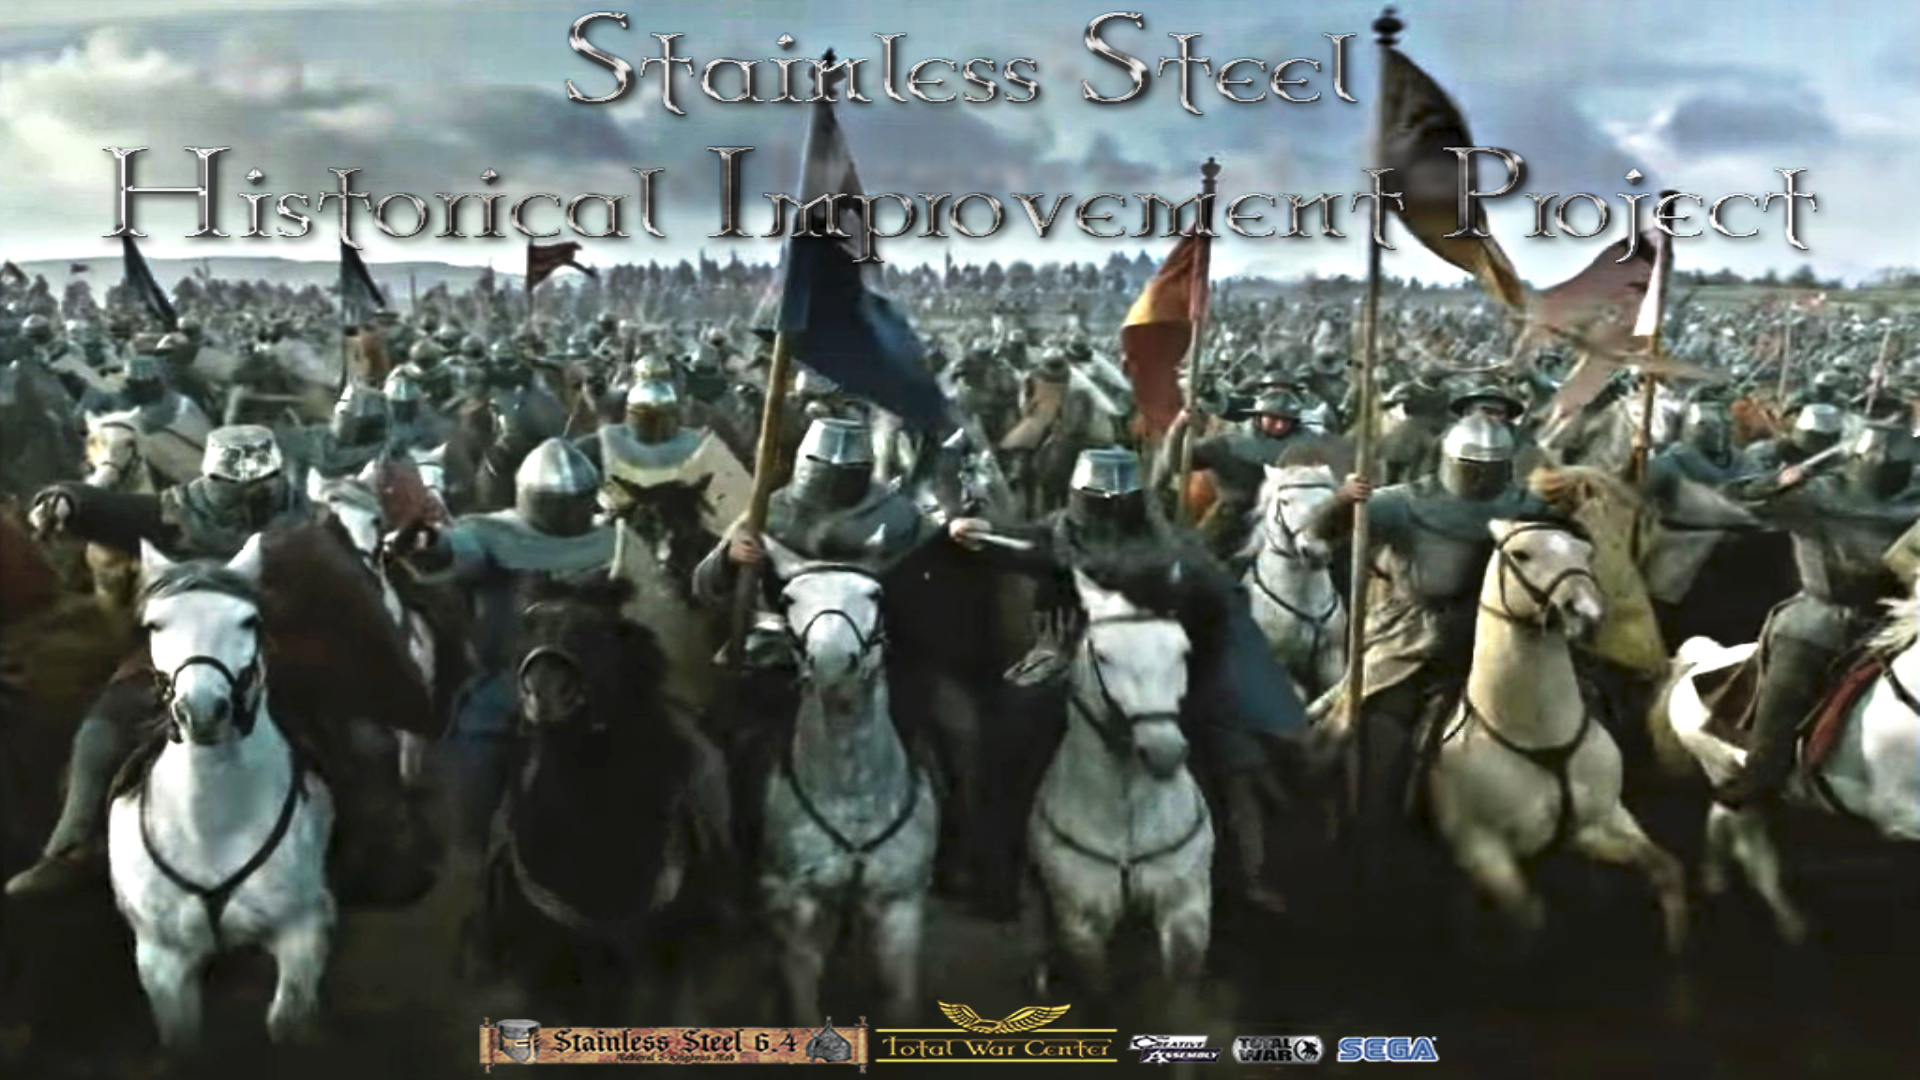 medieval 2 total war stainless steel factions